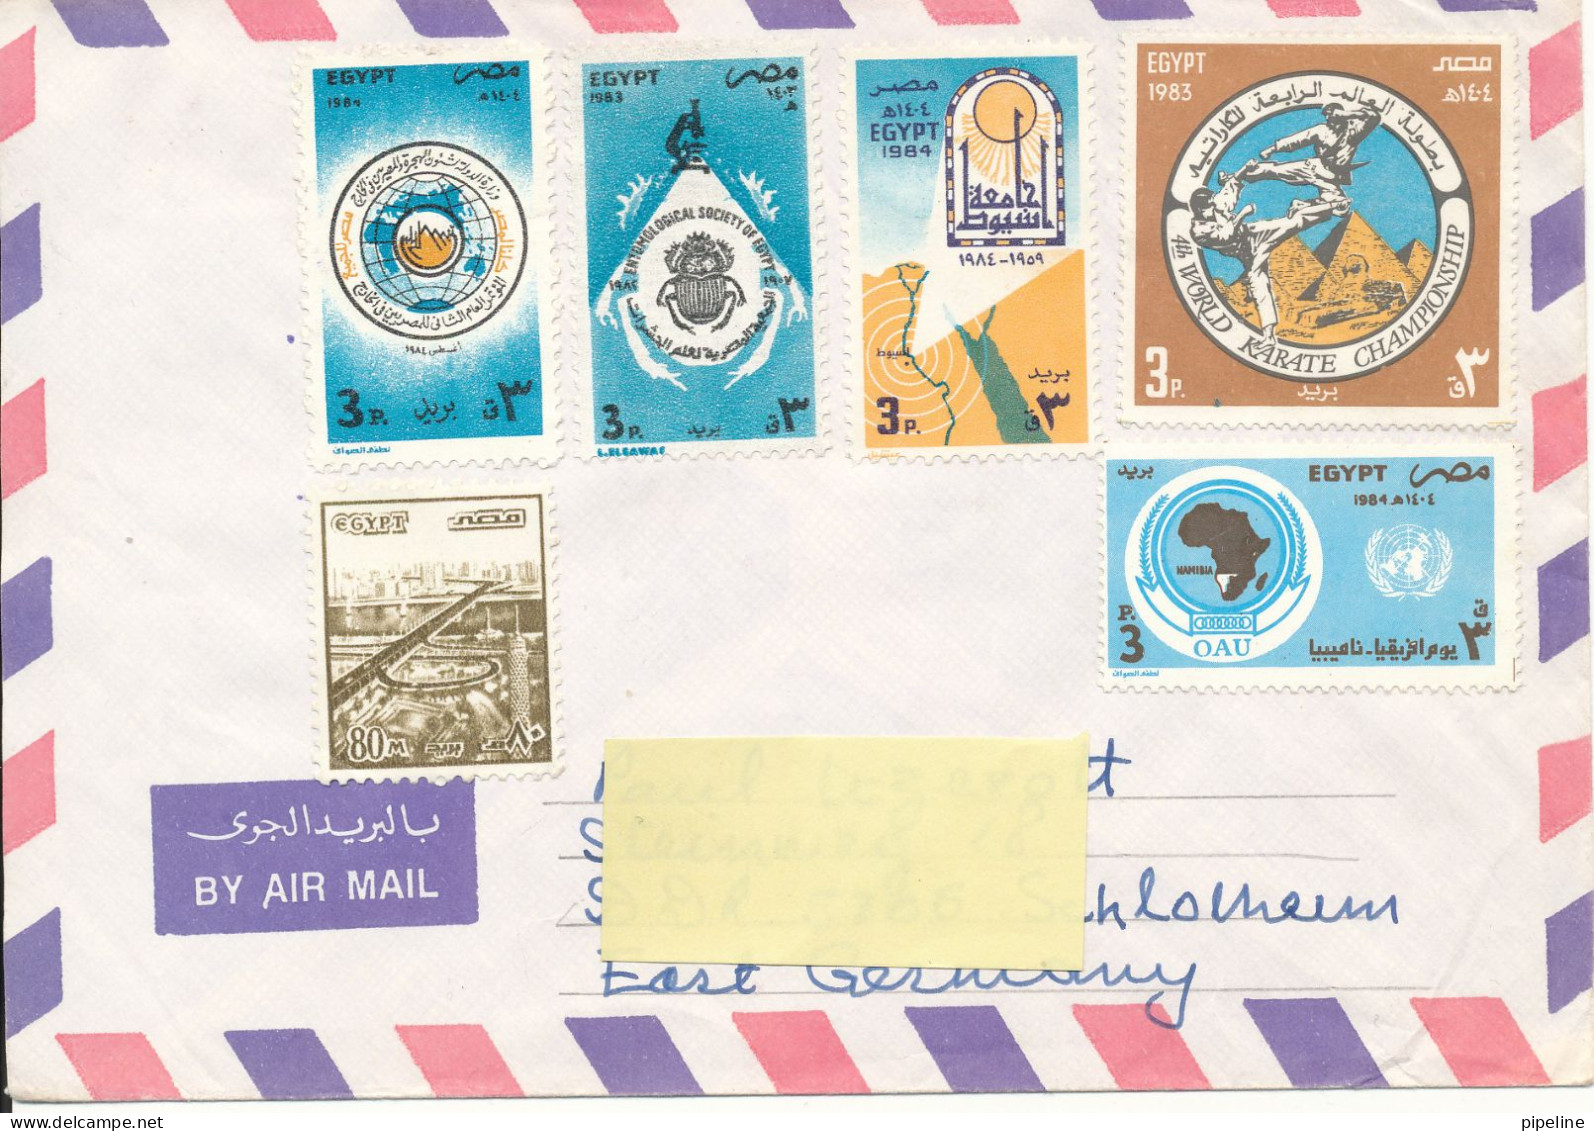 Egypt Air Mail Cover Sent To Germany DDR Topic Stamps No Postmarks On Stamps Or Cover - Airmail